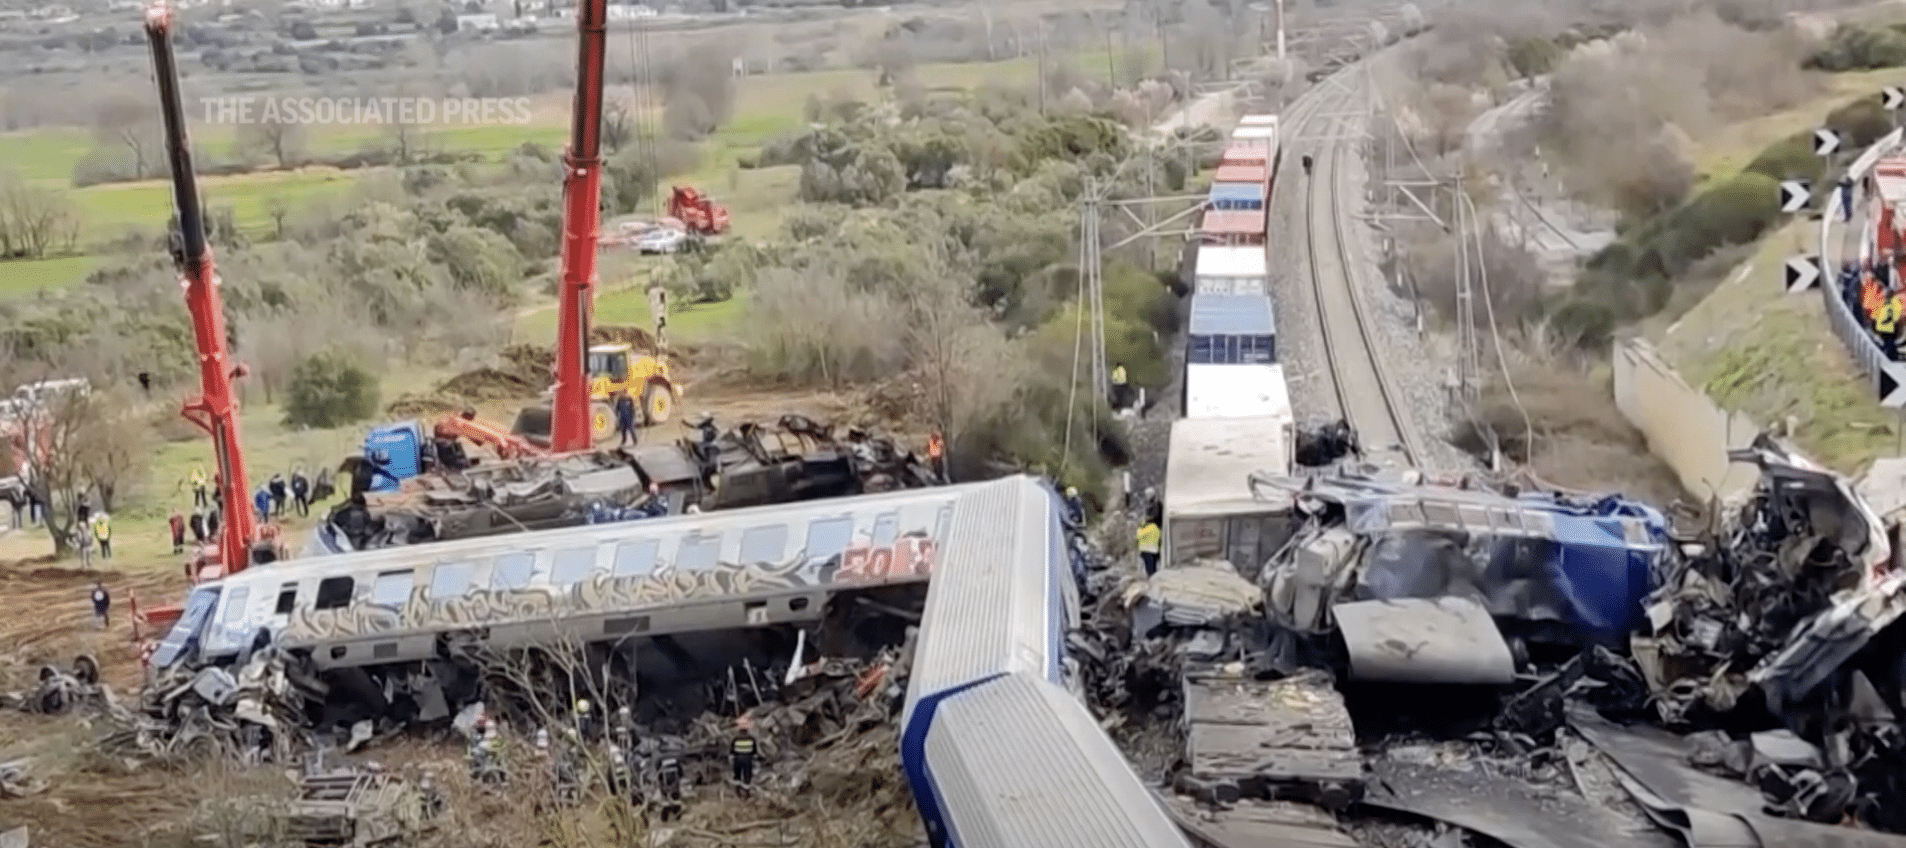 DEVELOPING: At least 36 dead and dozens more injured in train derailment